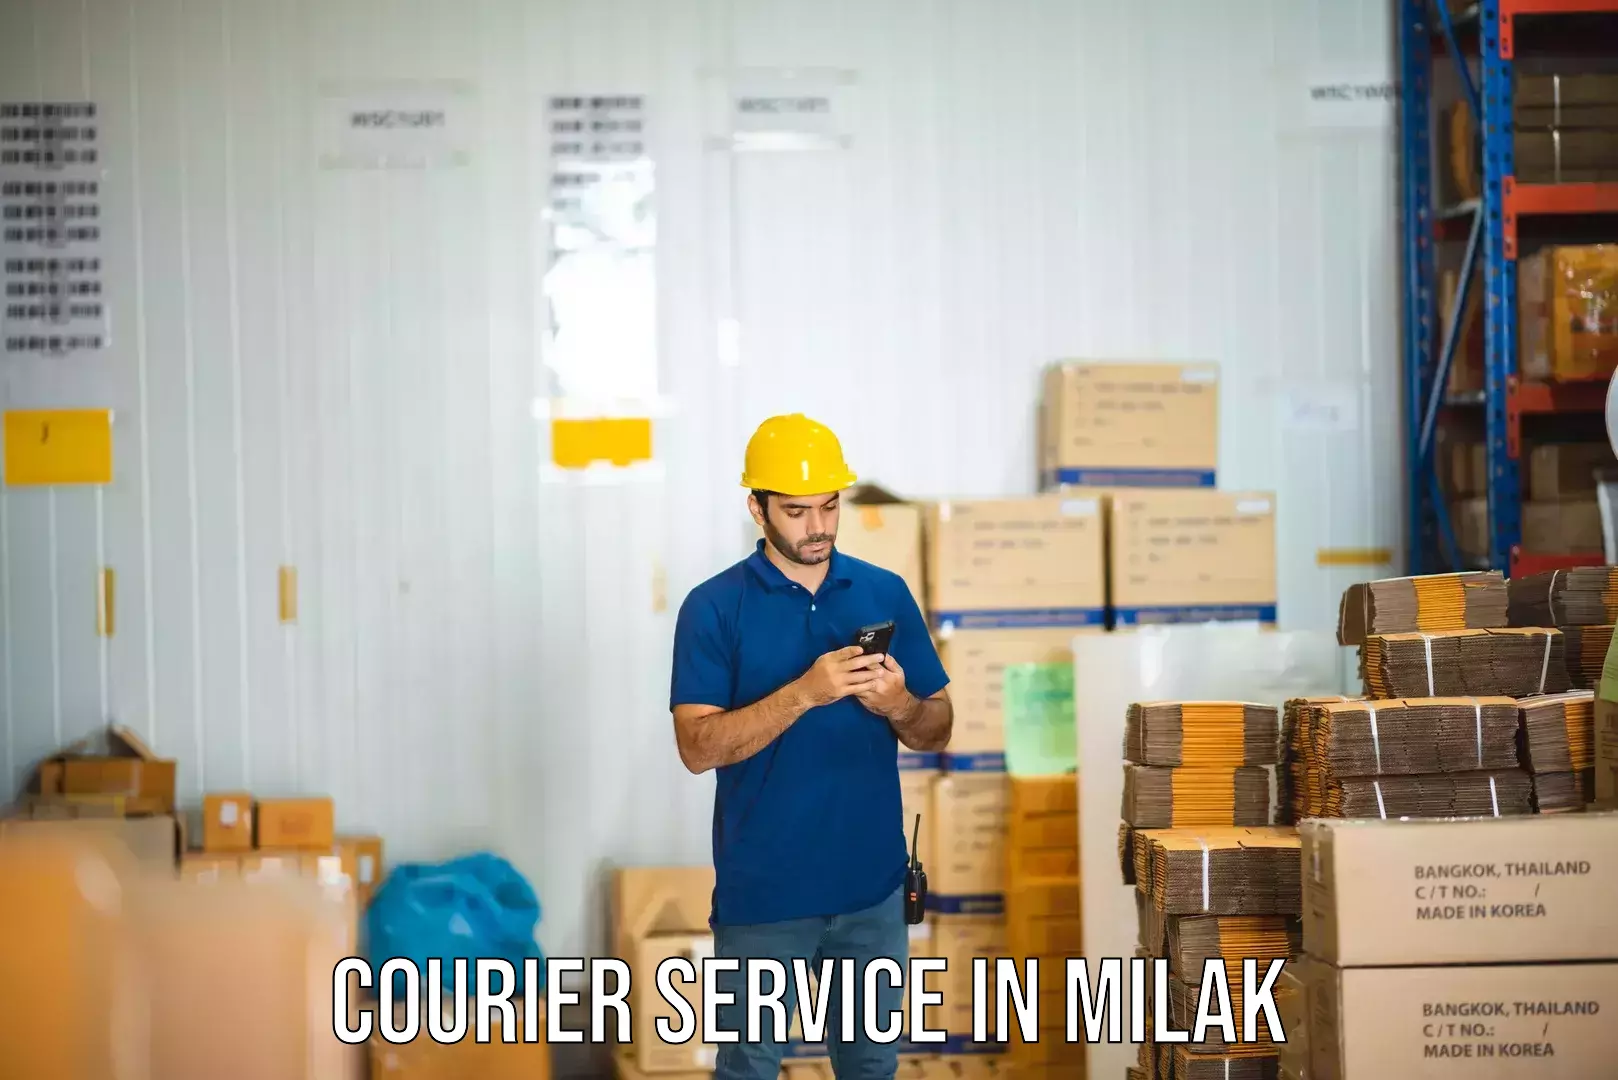 Sustainable shipping practices in Milak